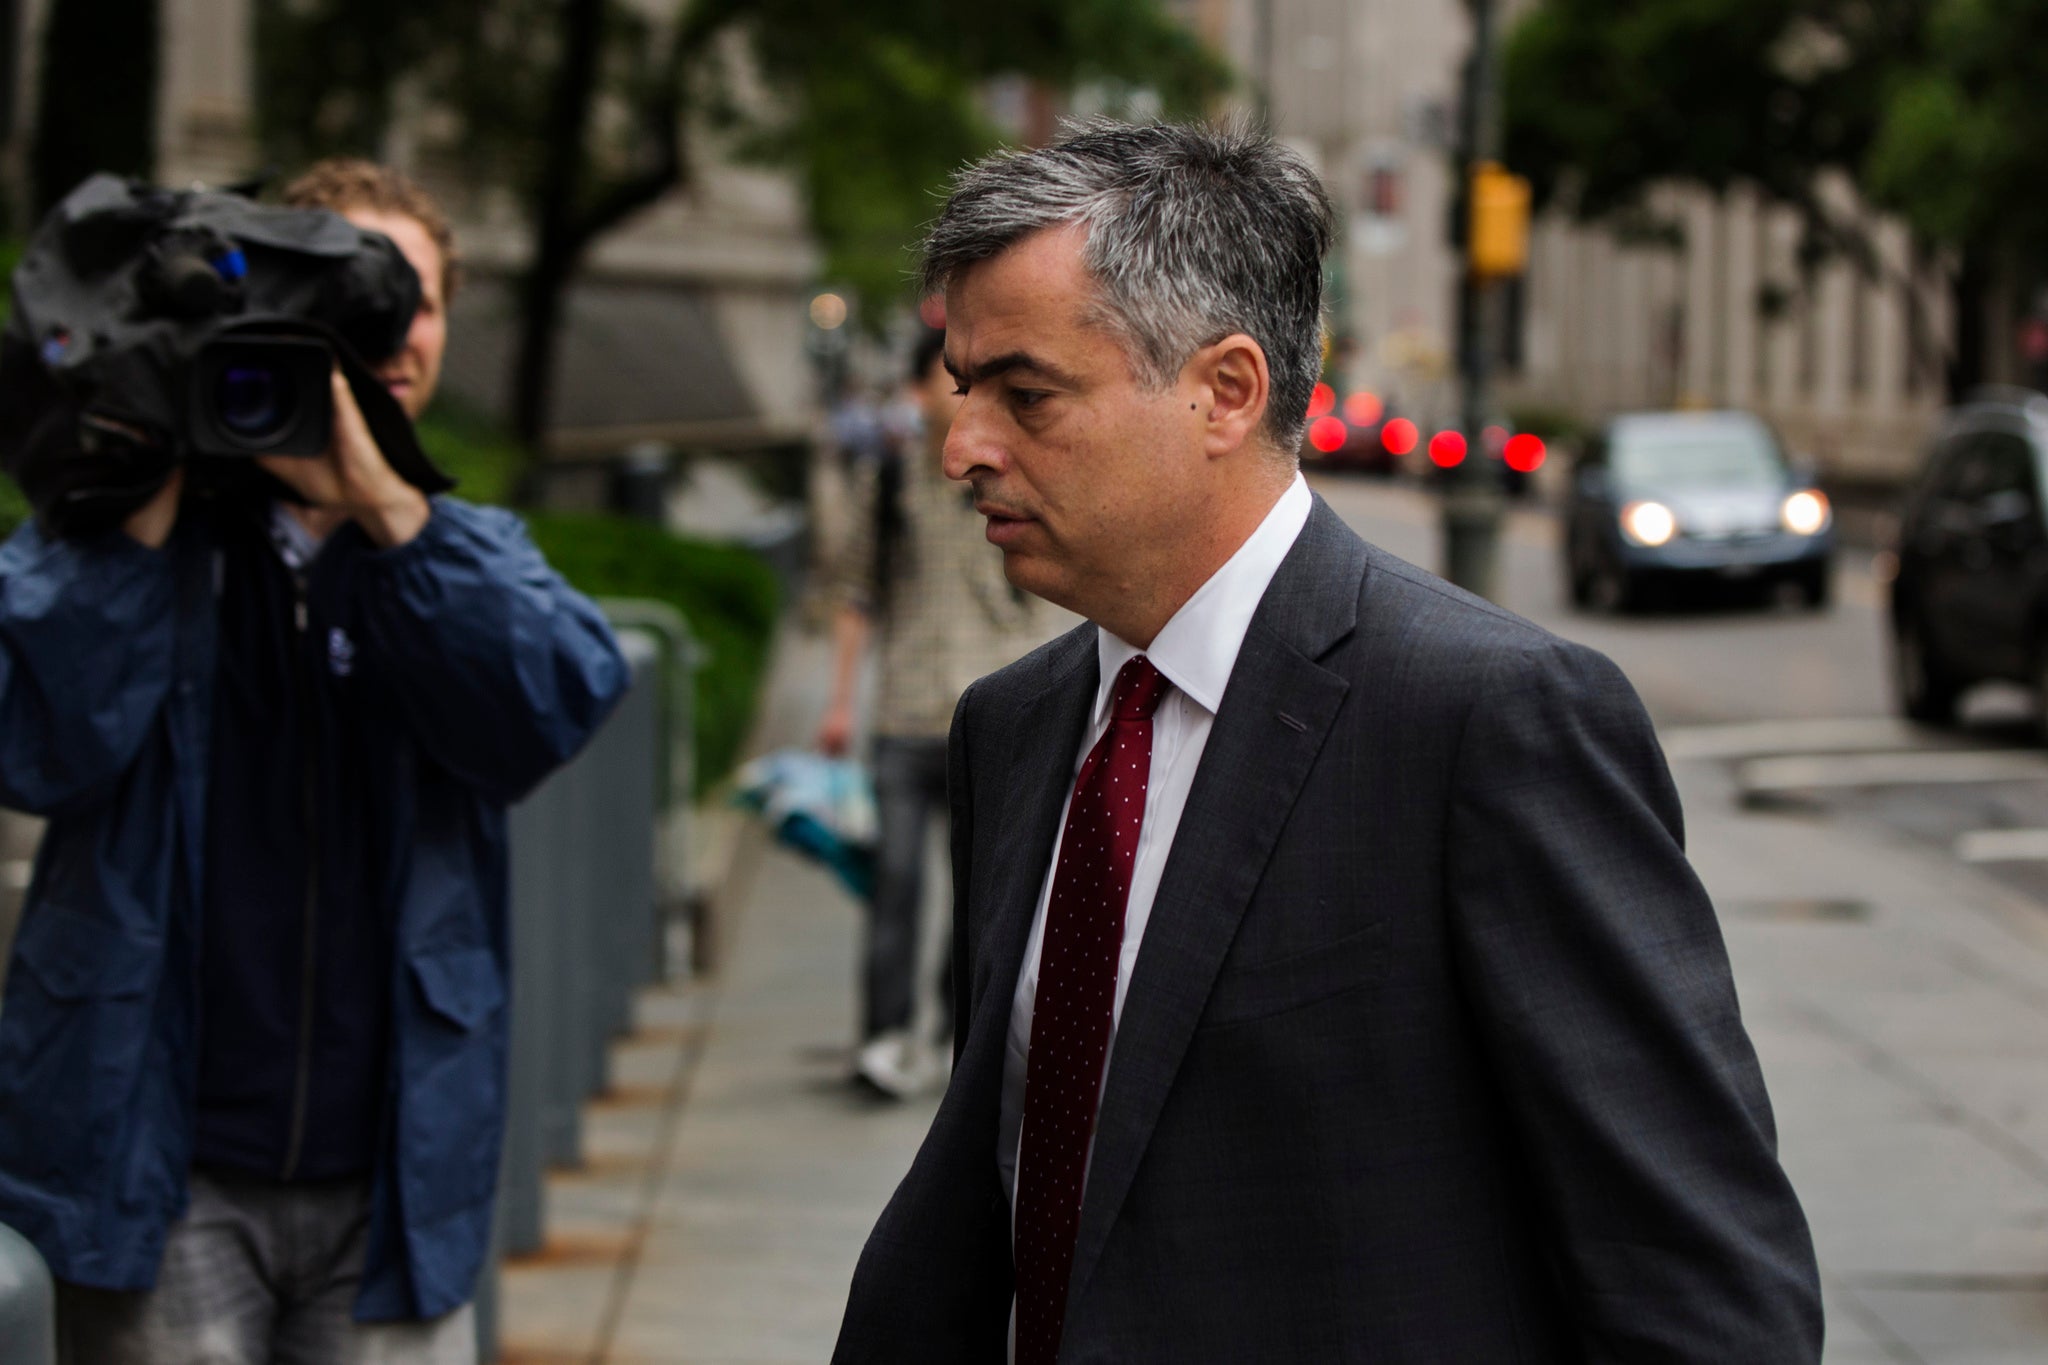 Eddy Cue, Apple's senior vice president of Internet Software and Services, arrives to testify in an antitrust trial brought against the company by the Department of Justice at Federal Court in New York, June 13, 2013. REUTERS/Lucas Jackson